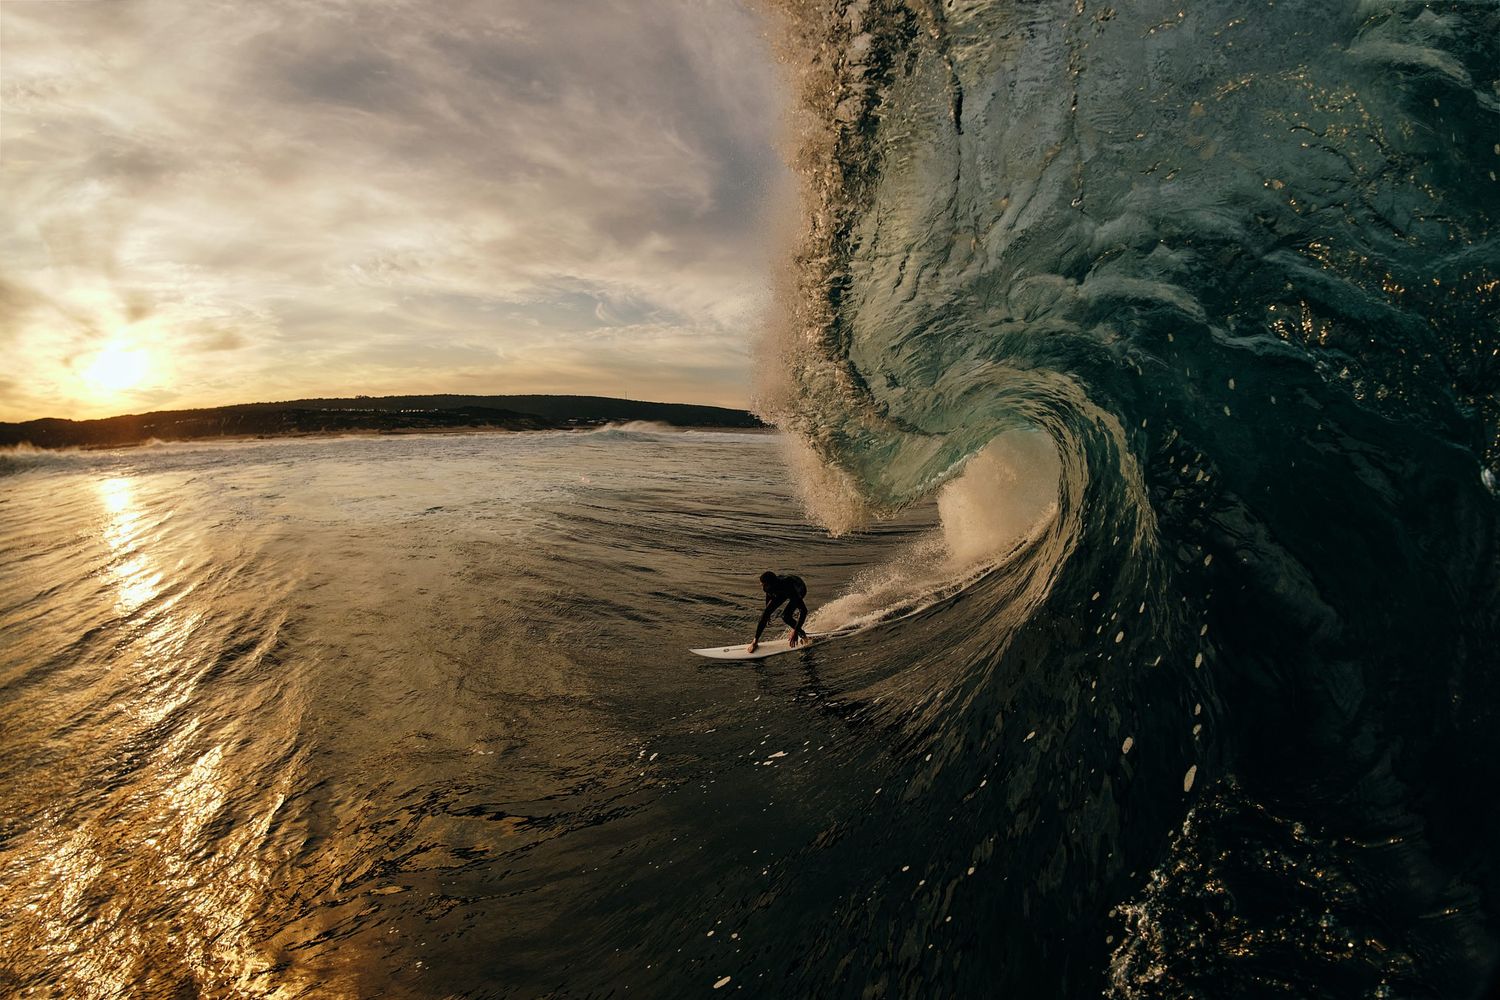 Photo Essay: Surfing at Main Break, Margaret River. Credit Russell Ord.